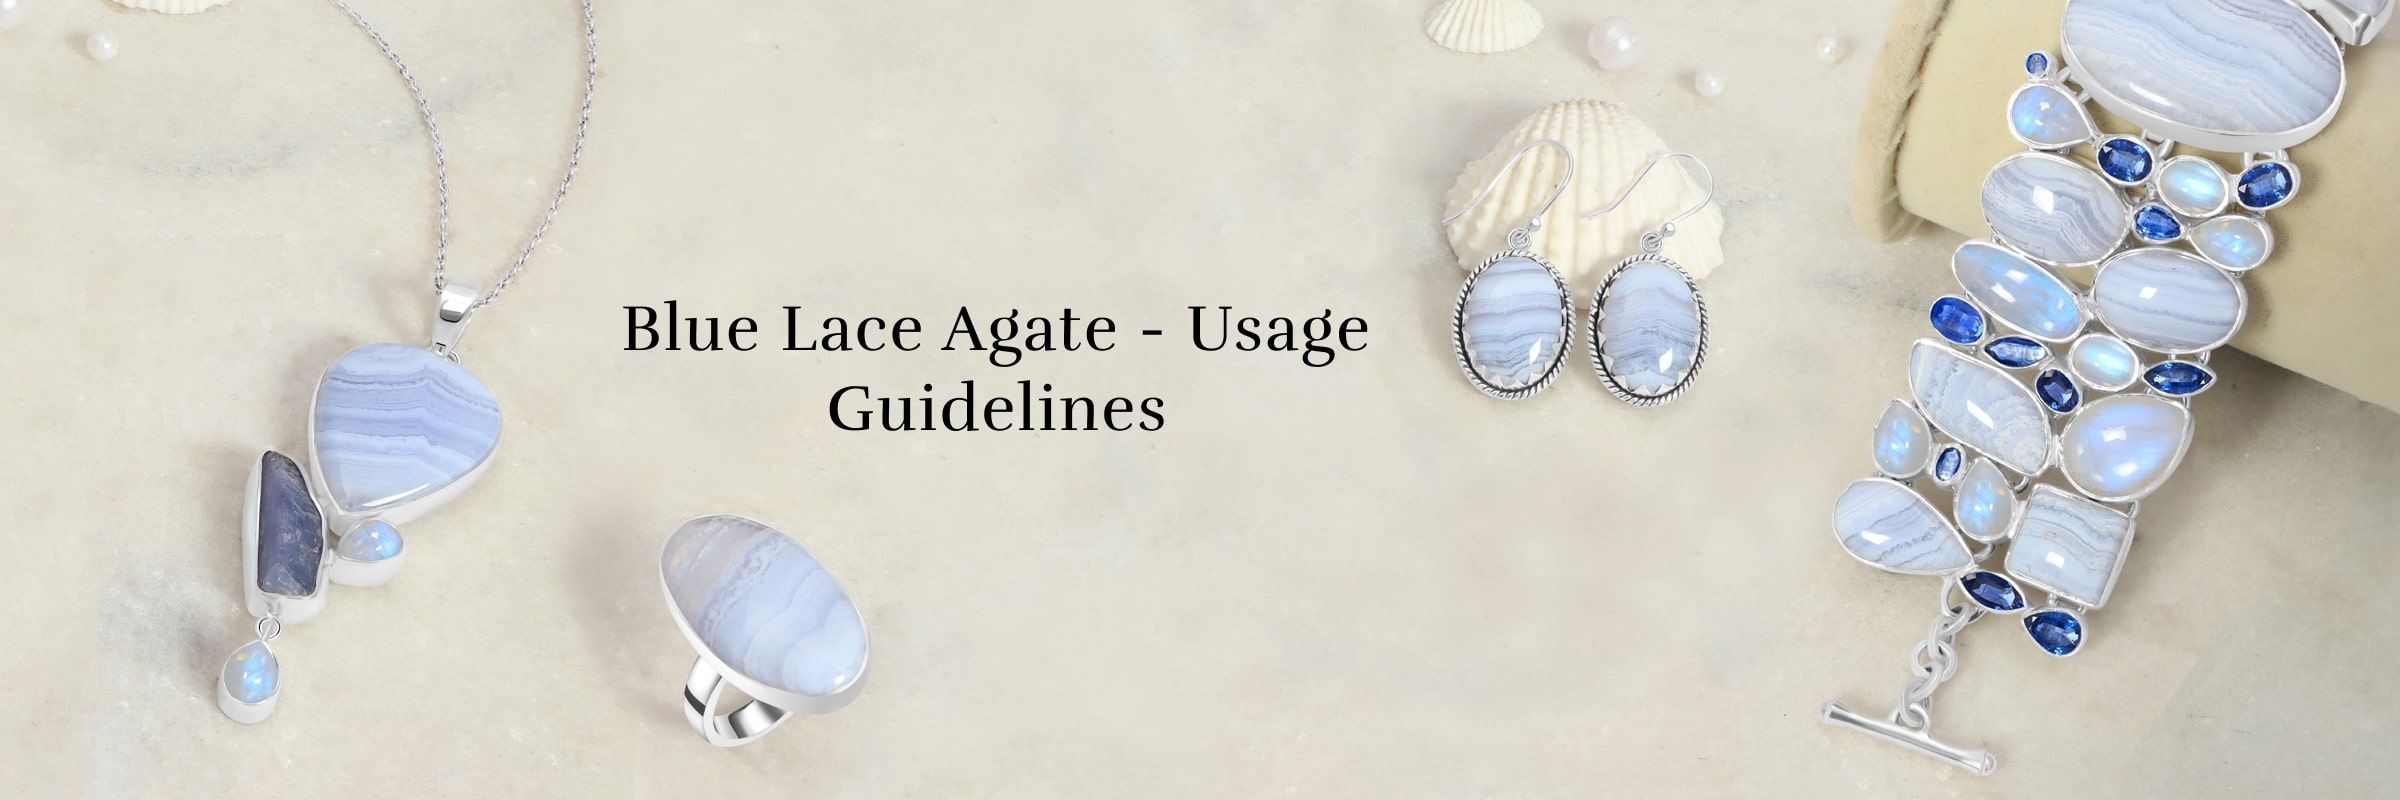 How to Use Blue Lace Agate